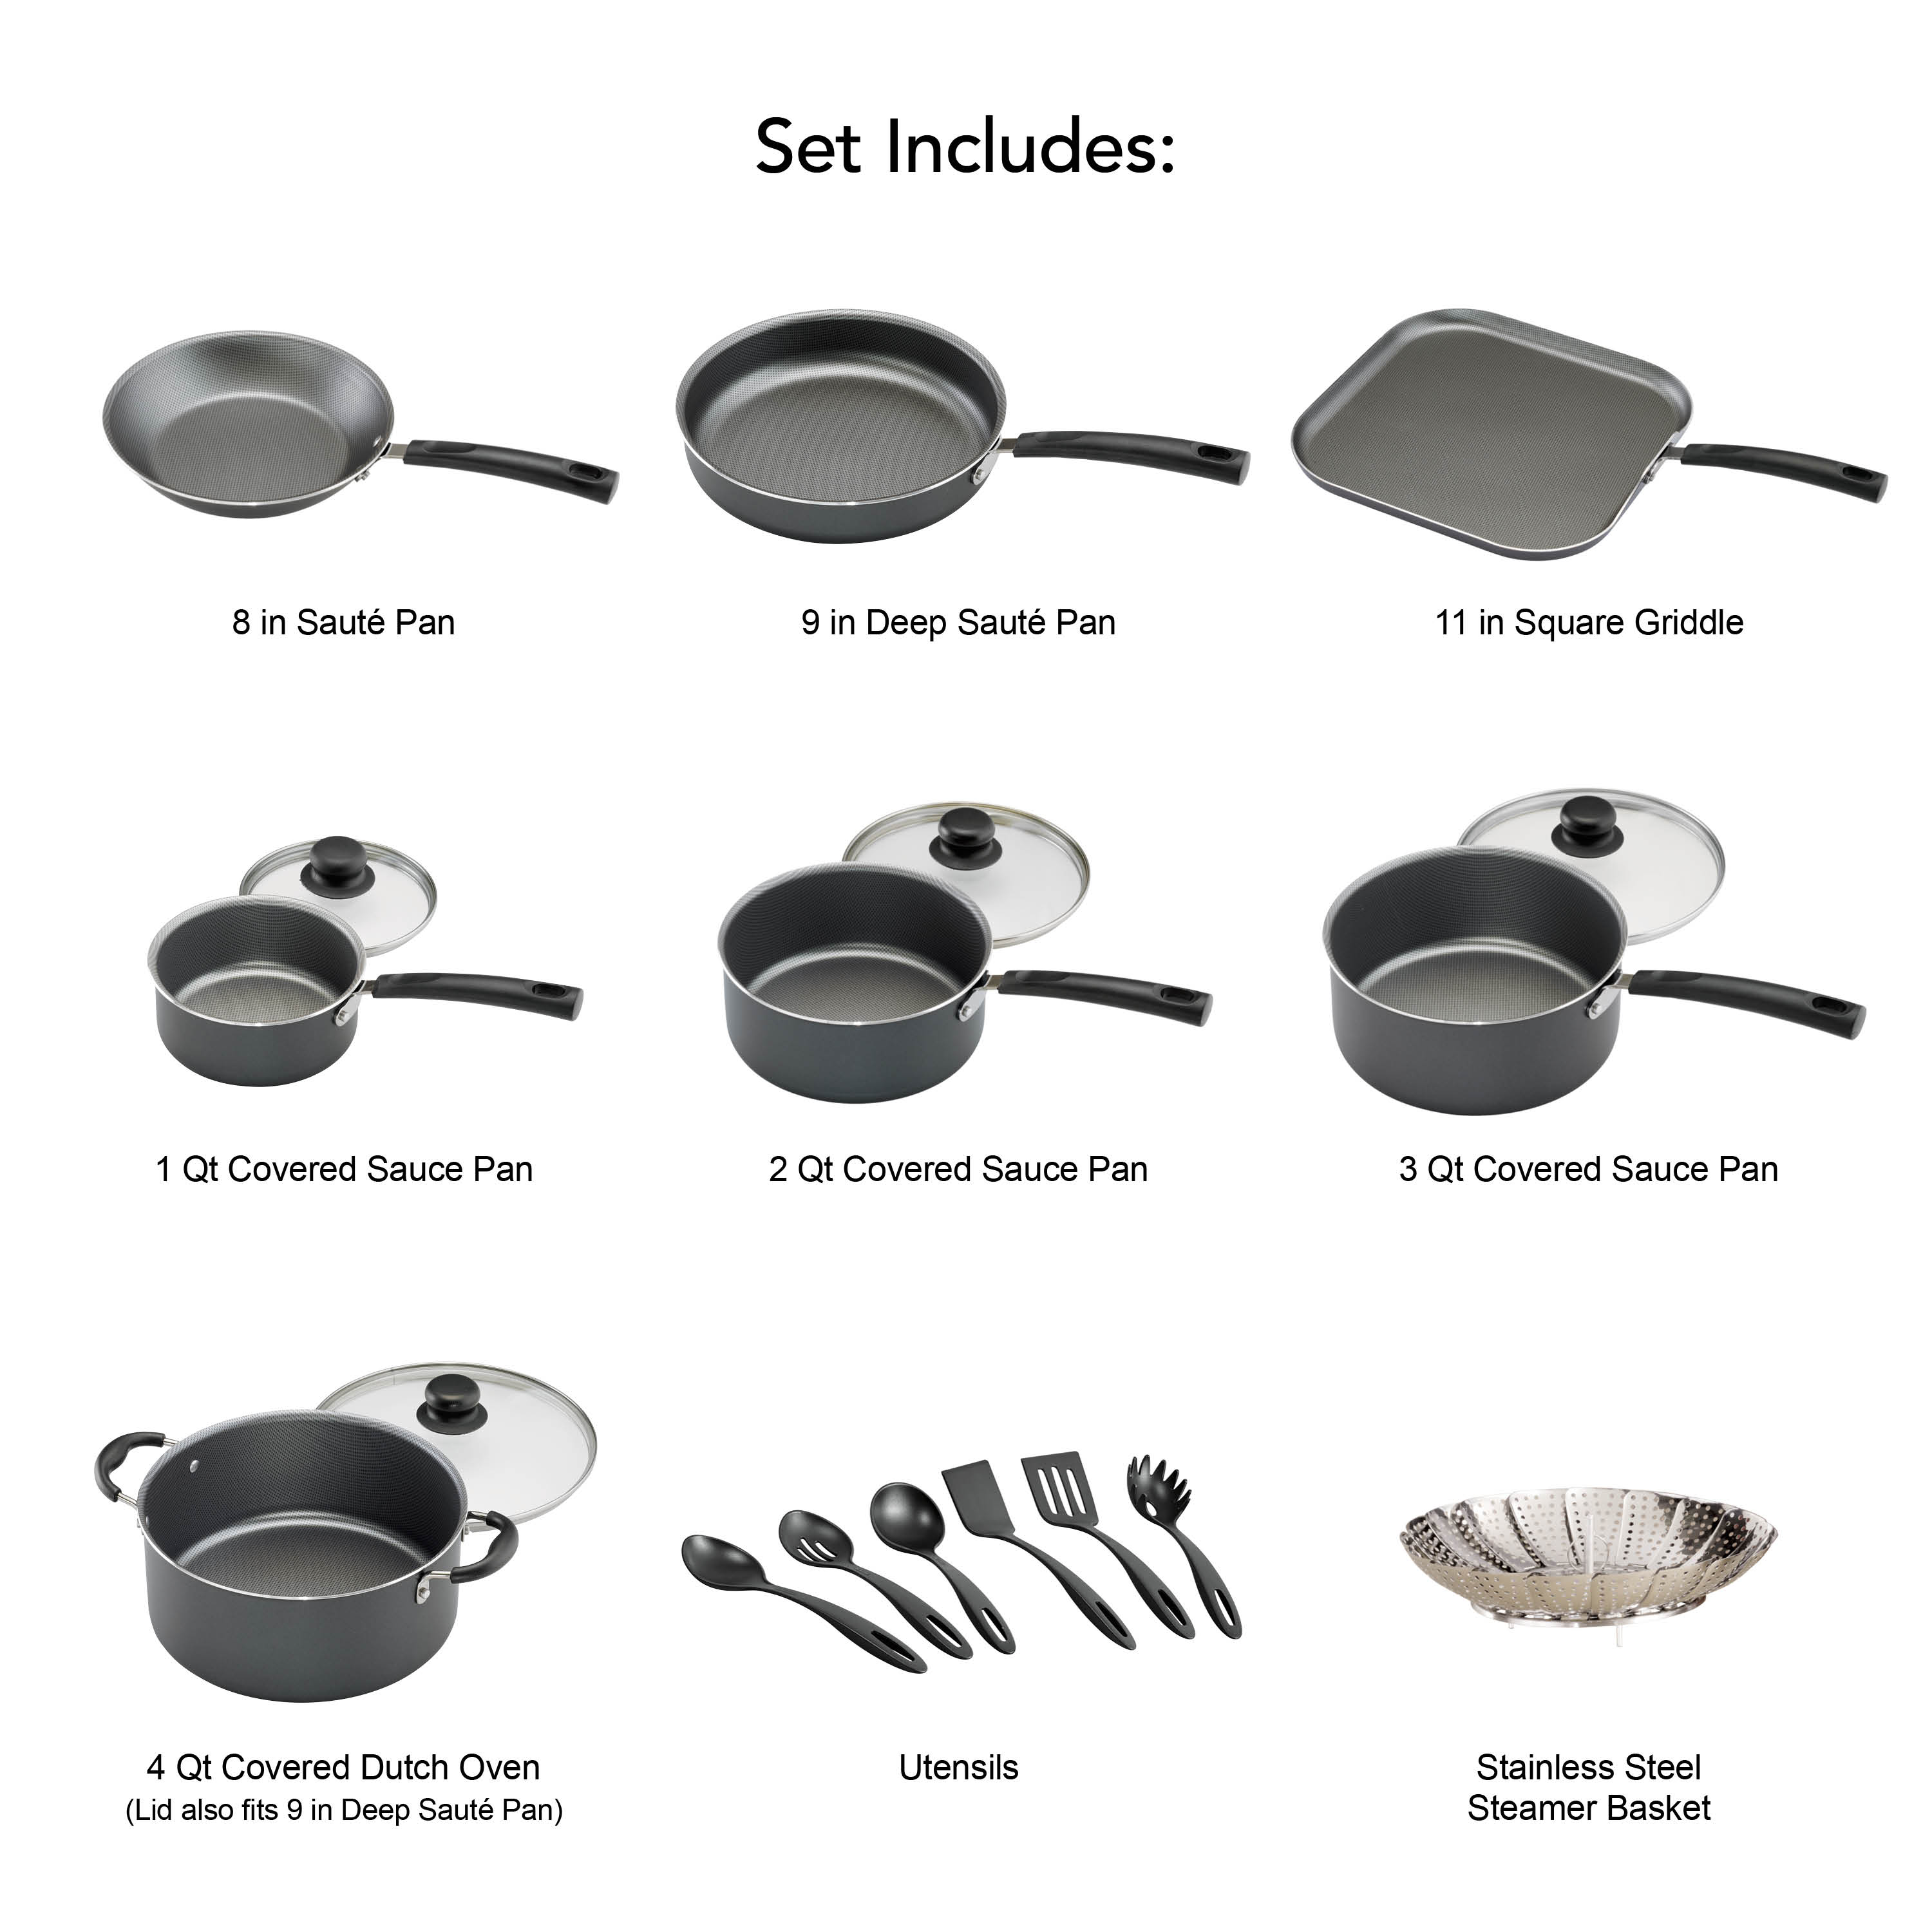 Tramontina Primaware 18 Piece Non-stick Cookware Set, Steel Gray - image 5 of 27